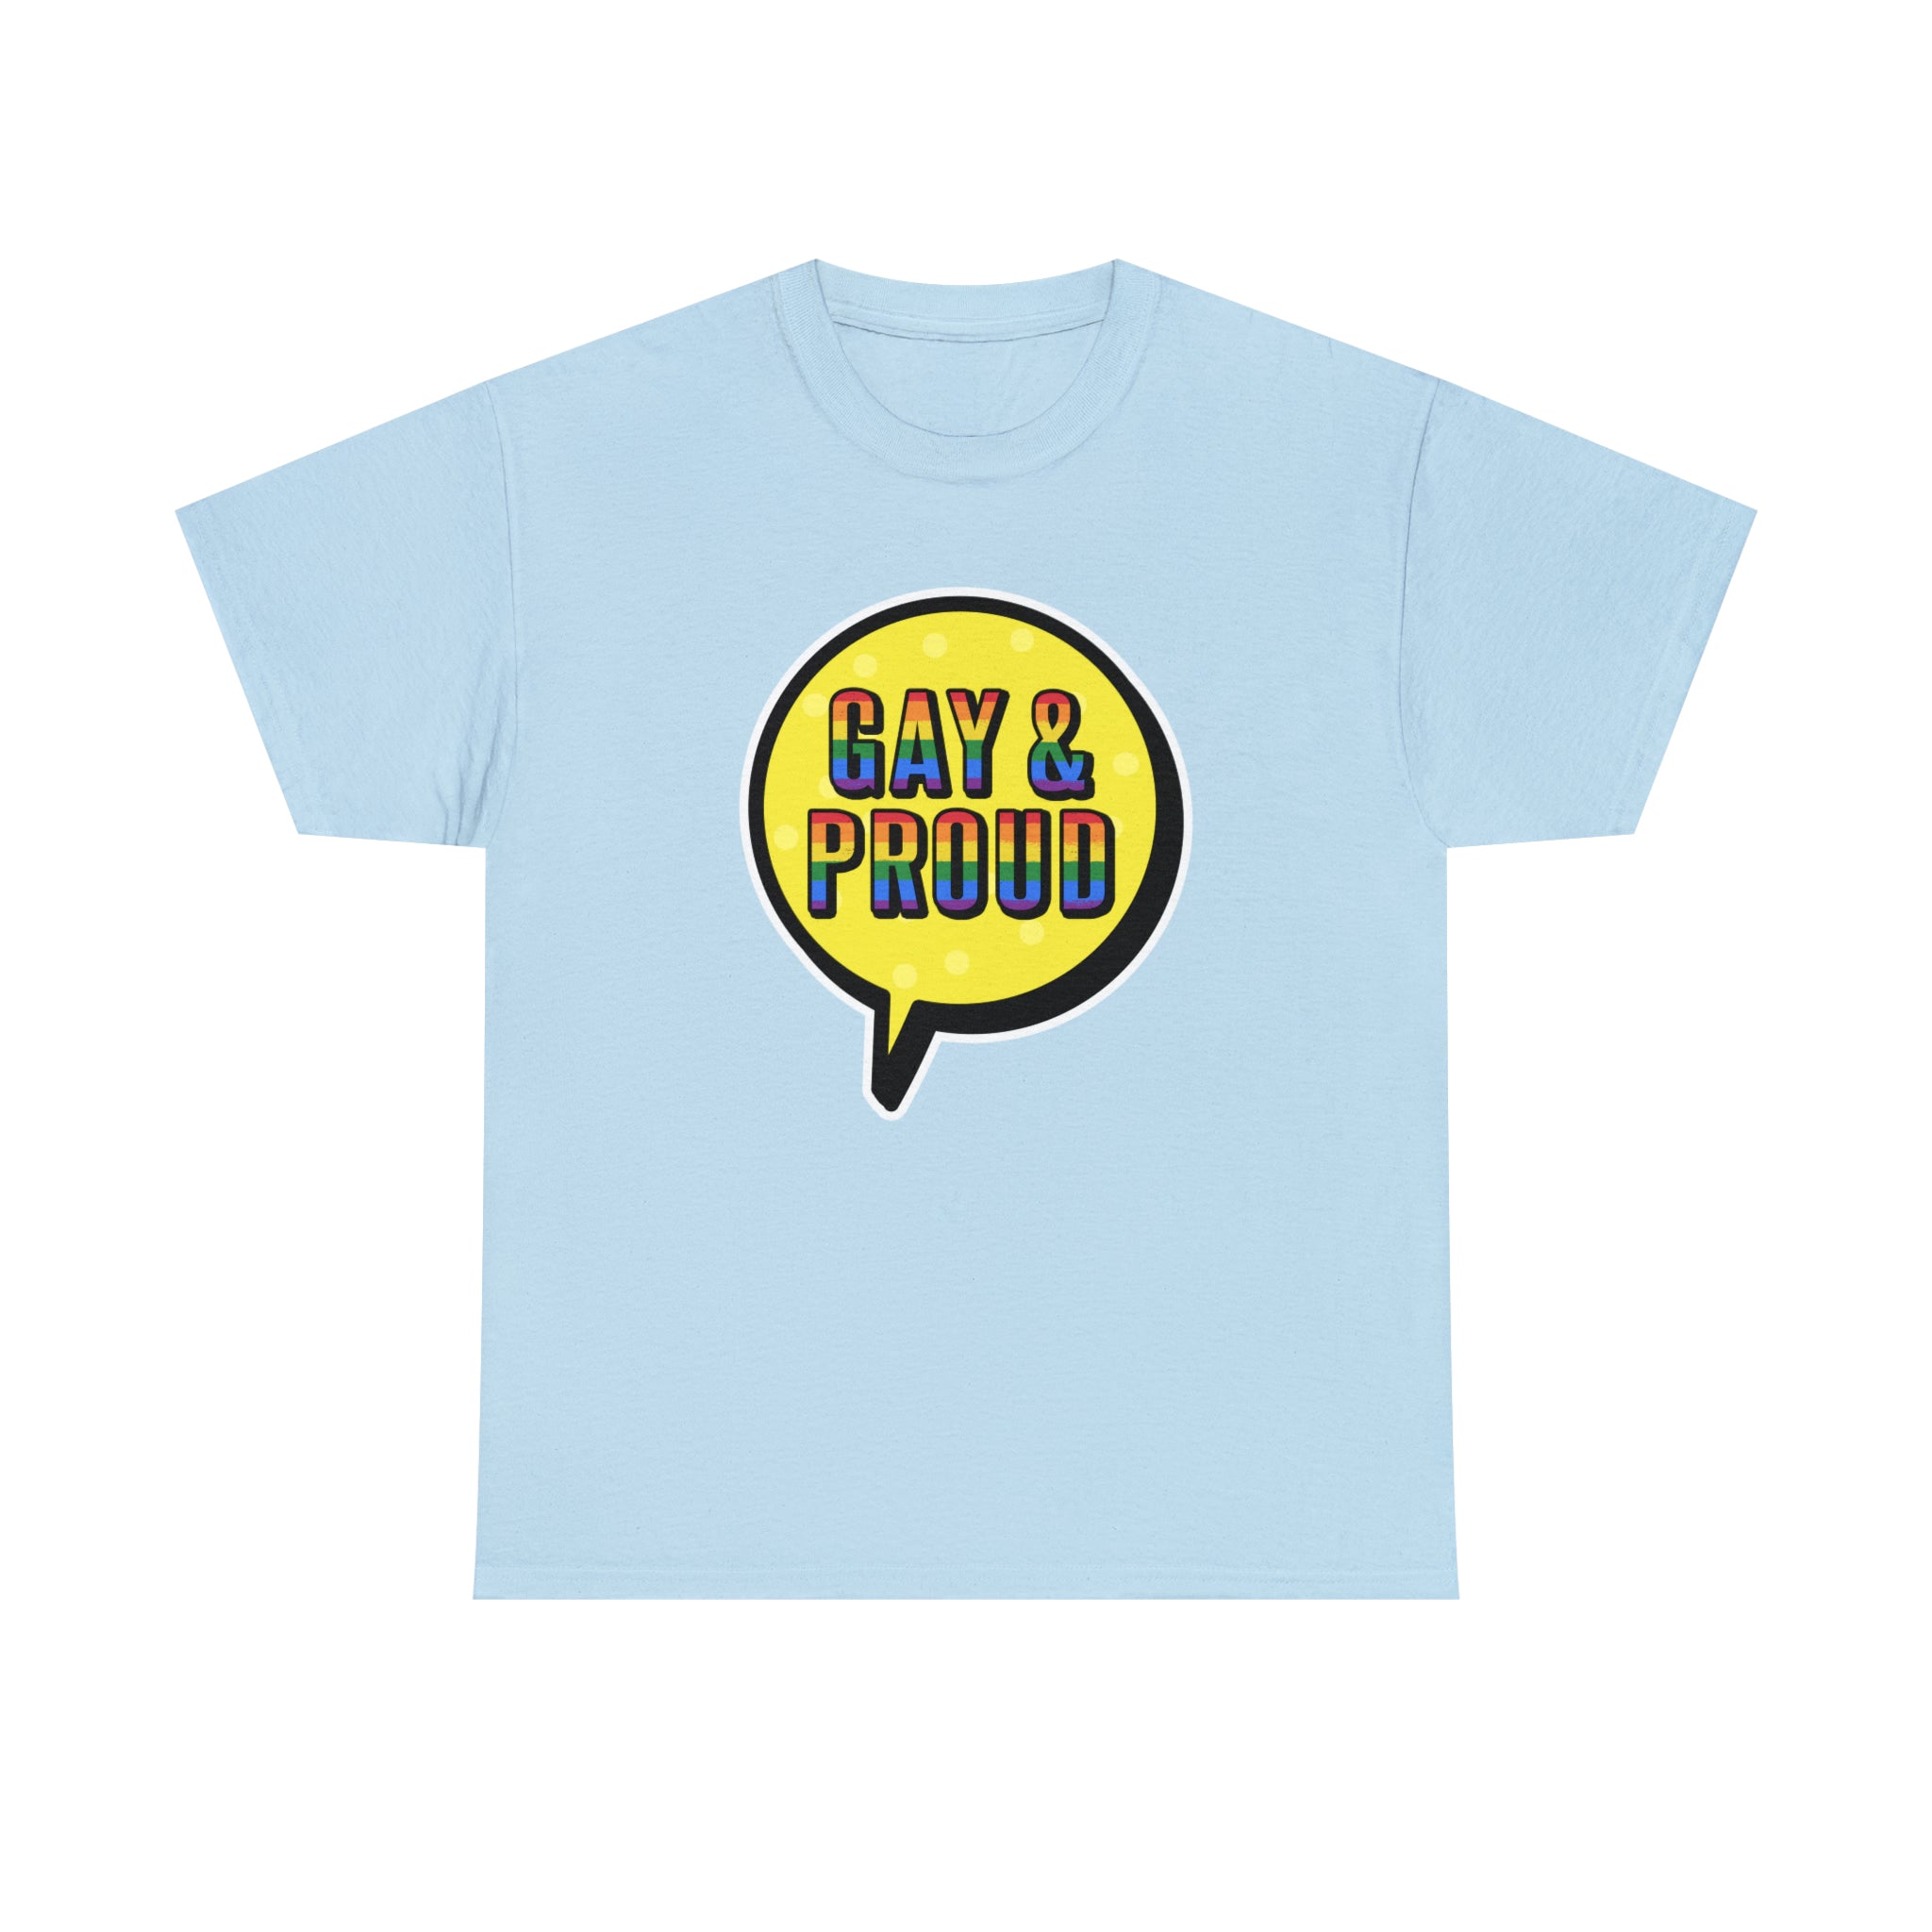 A Gay & Proud T-Shirt with a yellow circle and text in blue and yellow.